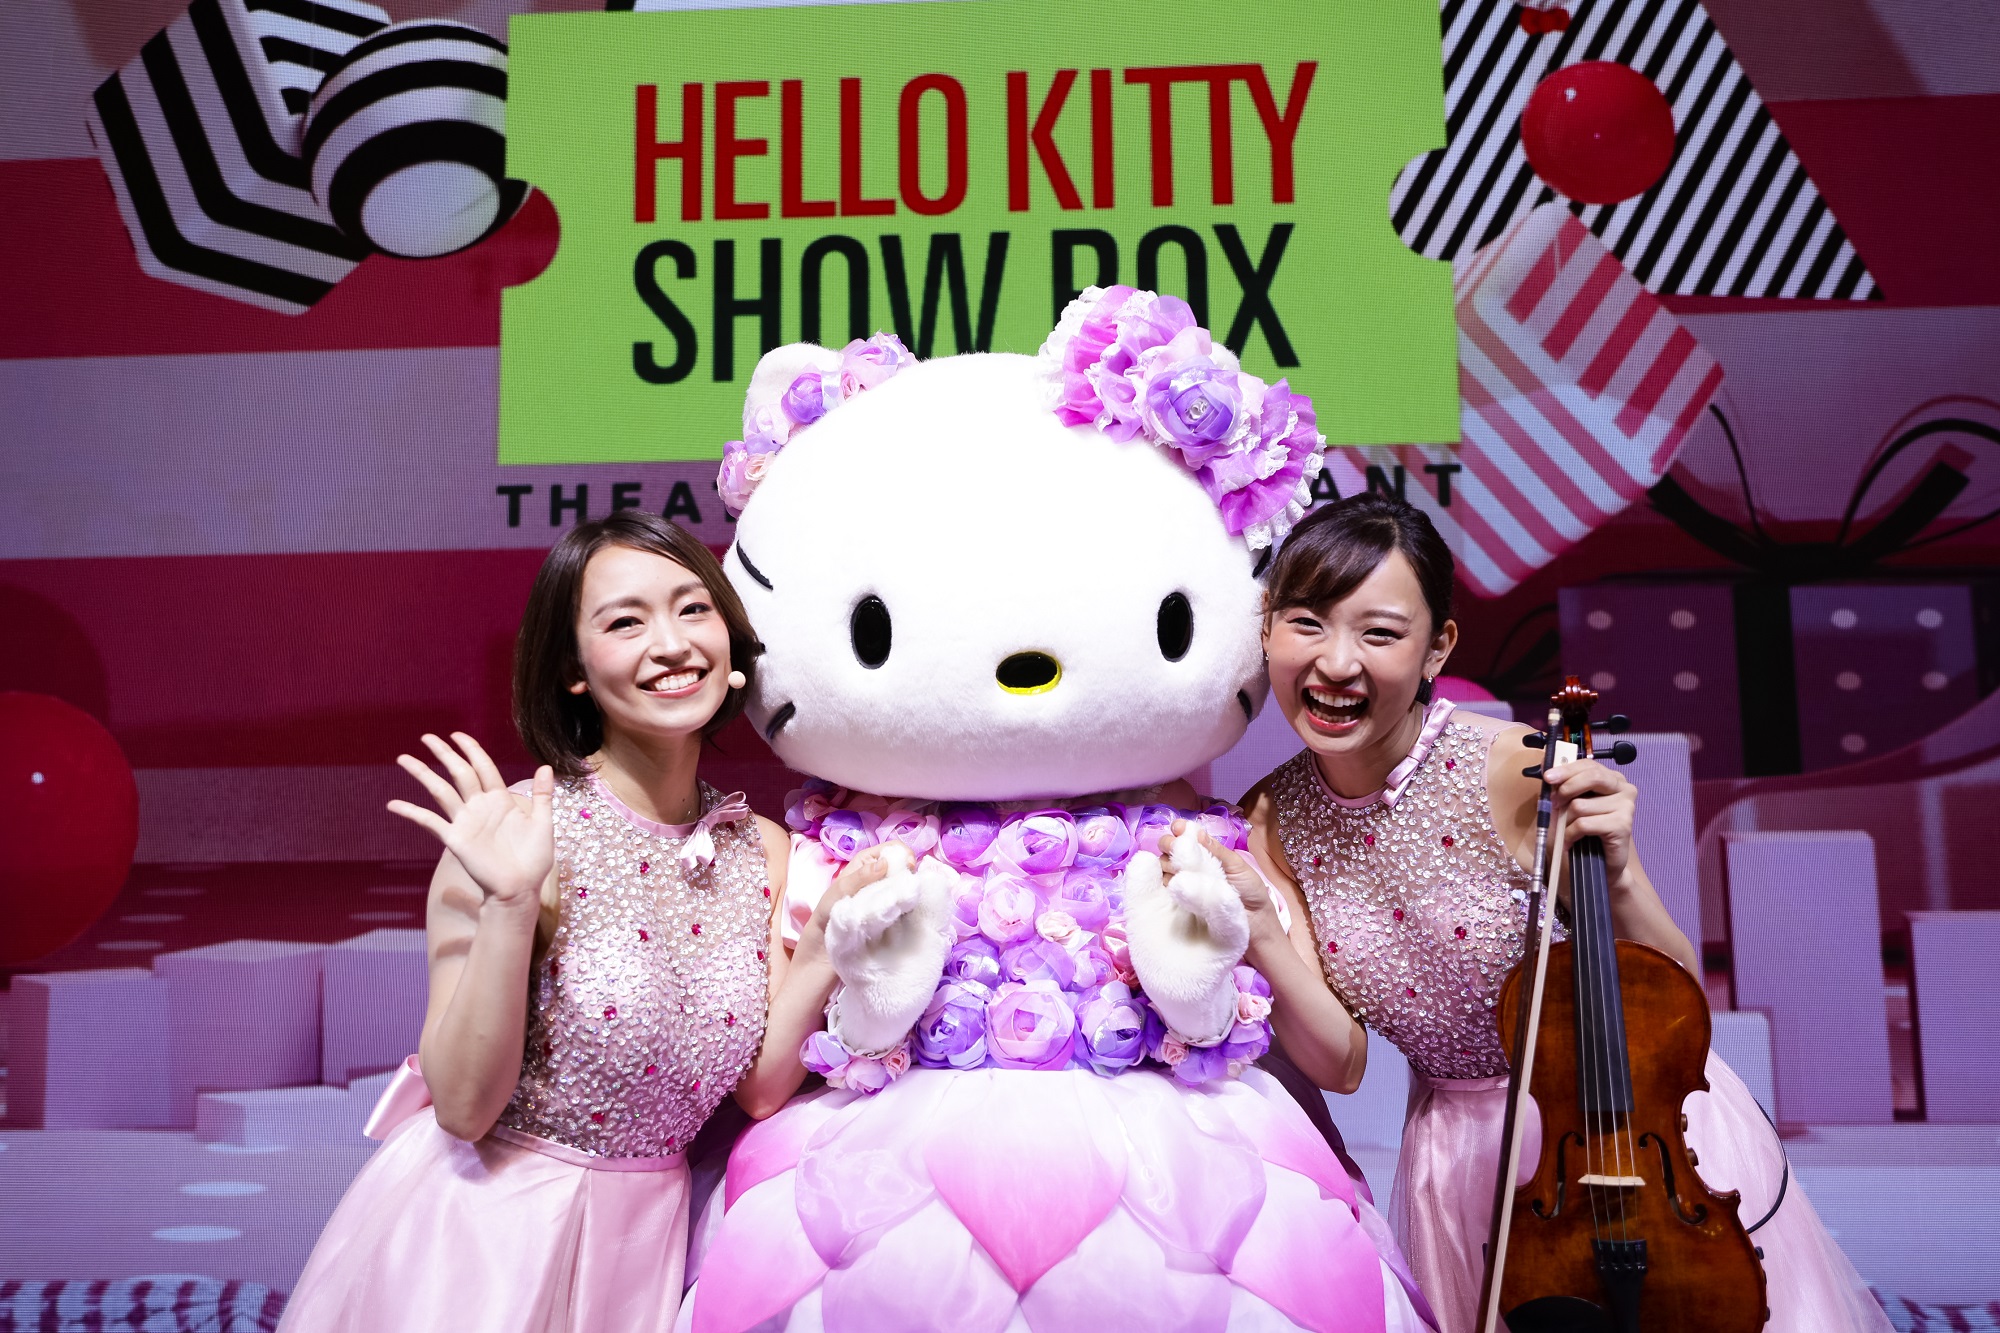 Hello Kitty Greets Fans with Song and Dance Every Day at the HELLO KITTY  SHOW BOX, MOSHI MOSHI NIPPON